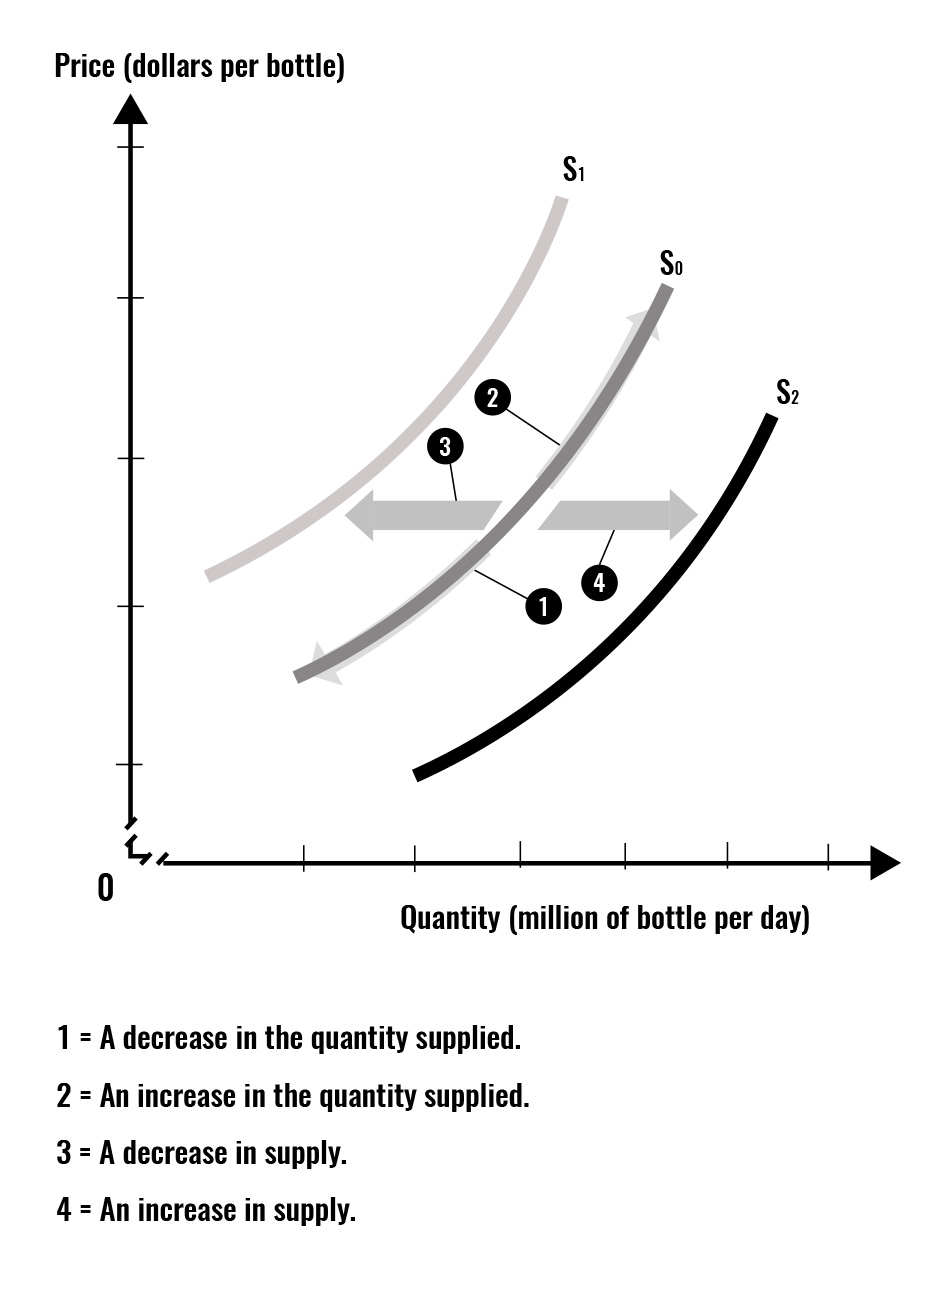 The graph summarizes supply shifters leading to an increase or decrease in supply. In addition, it emphasizes that what causes a movement along the supply curve is the change in the own price of the good or service.